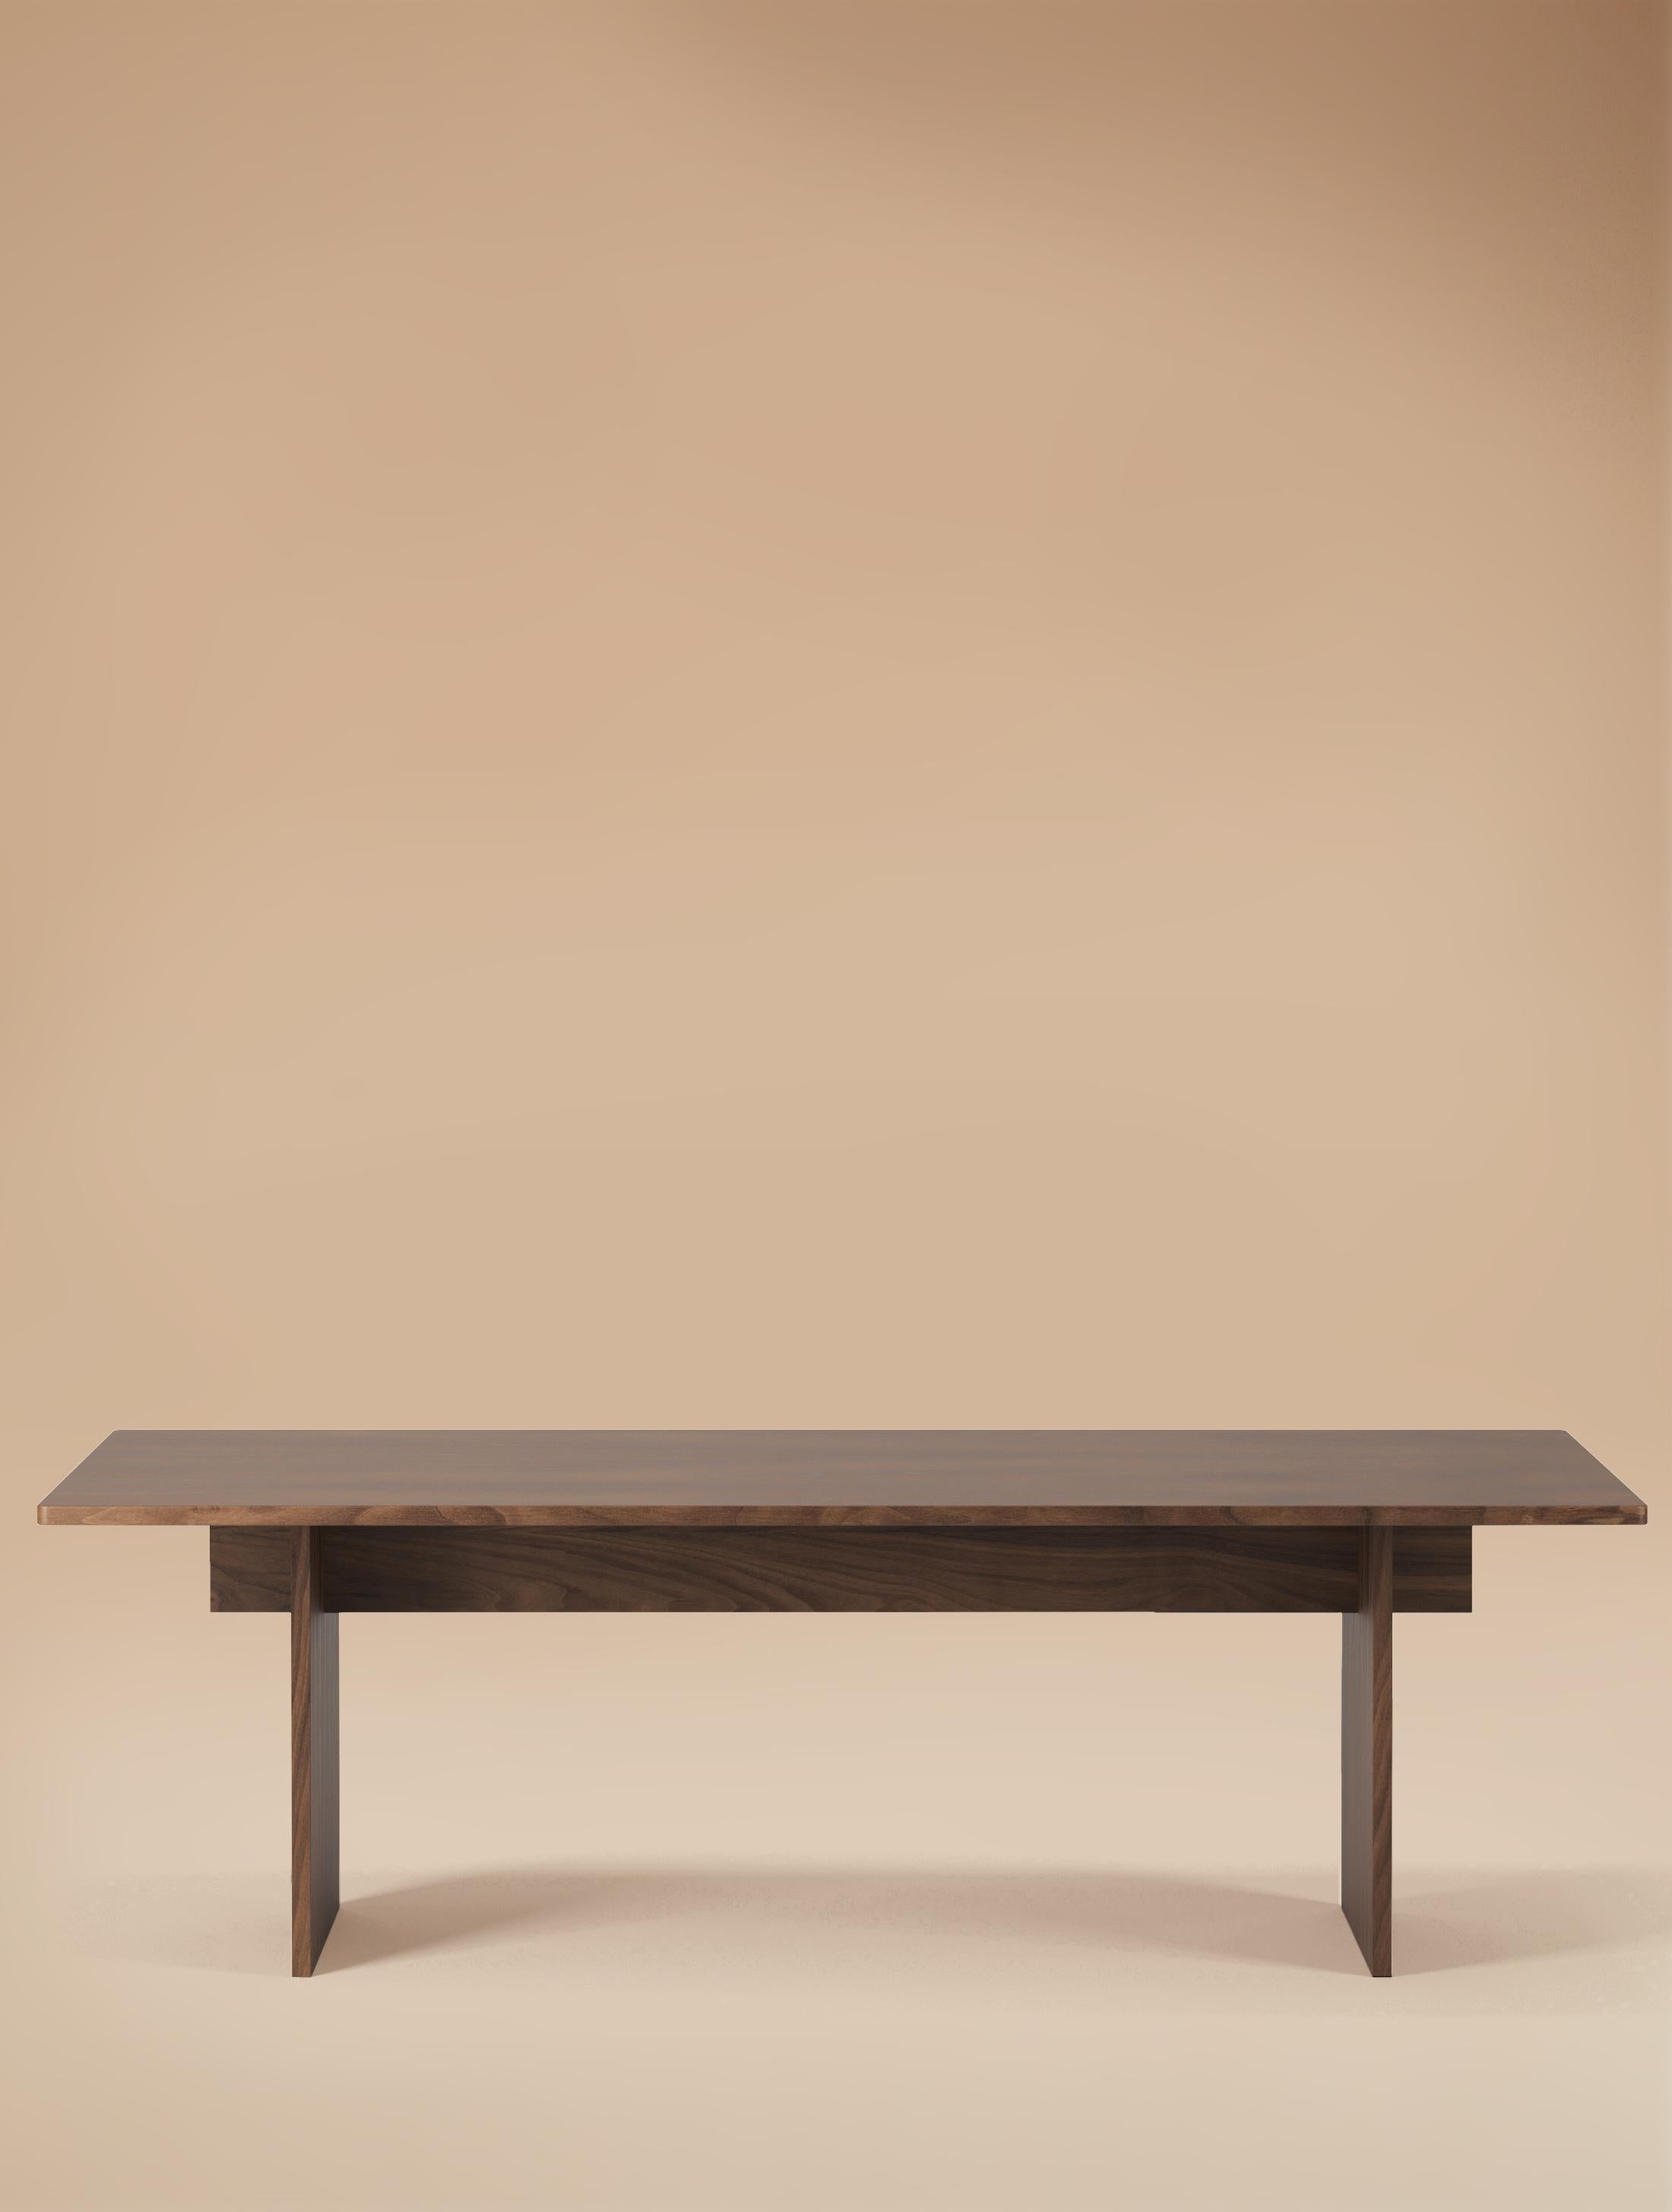 6 Seater Faure Table Handcrafted in Blackened Oiled Oak by Lemon 13